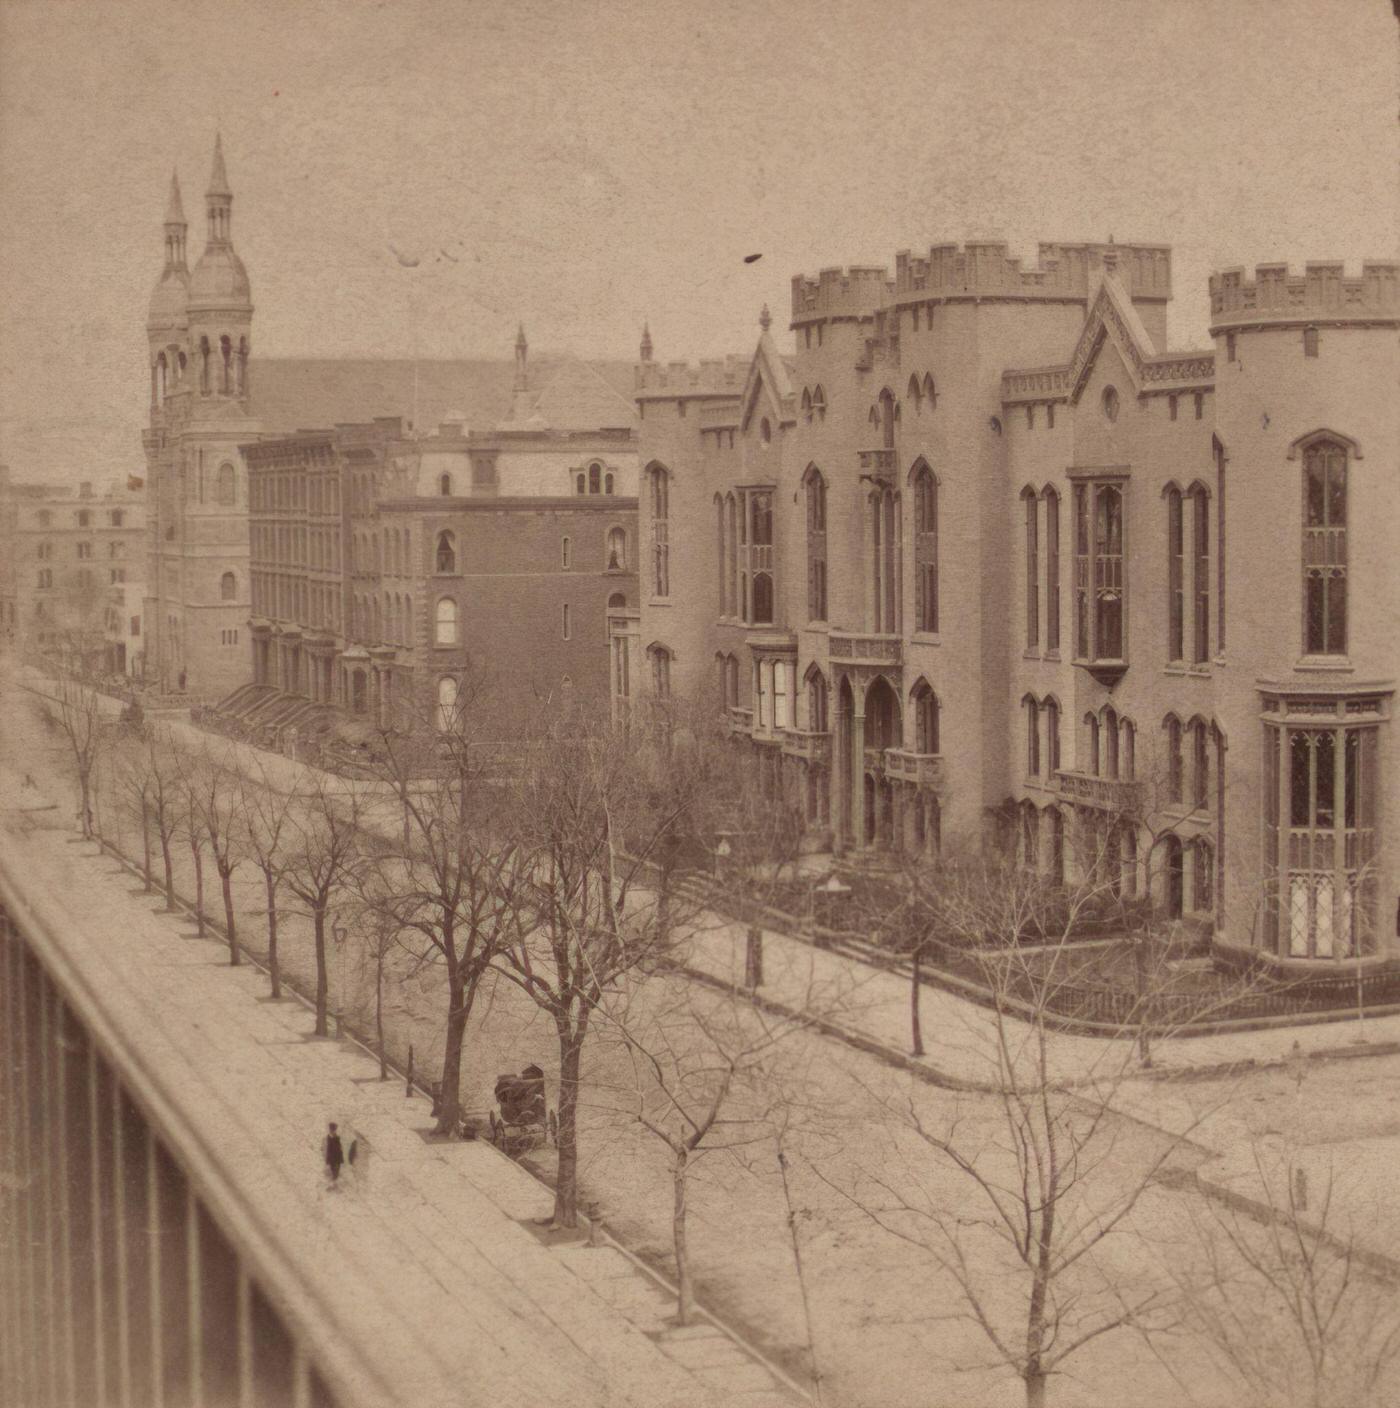 Fifth Avenue, Looking North From The Reservoir, Manhattan, 1860